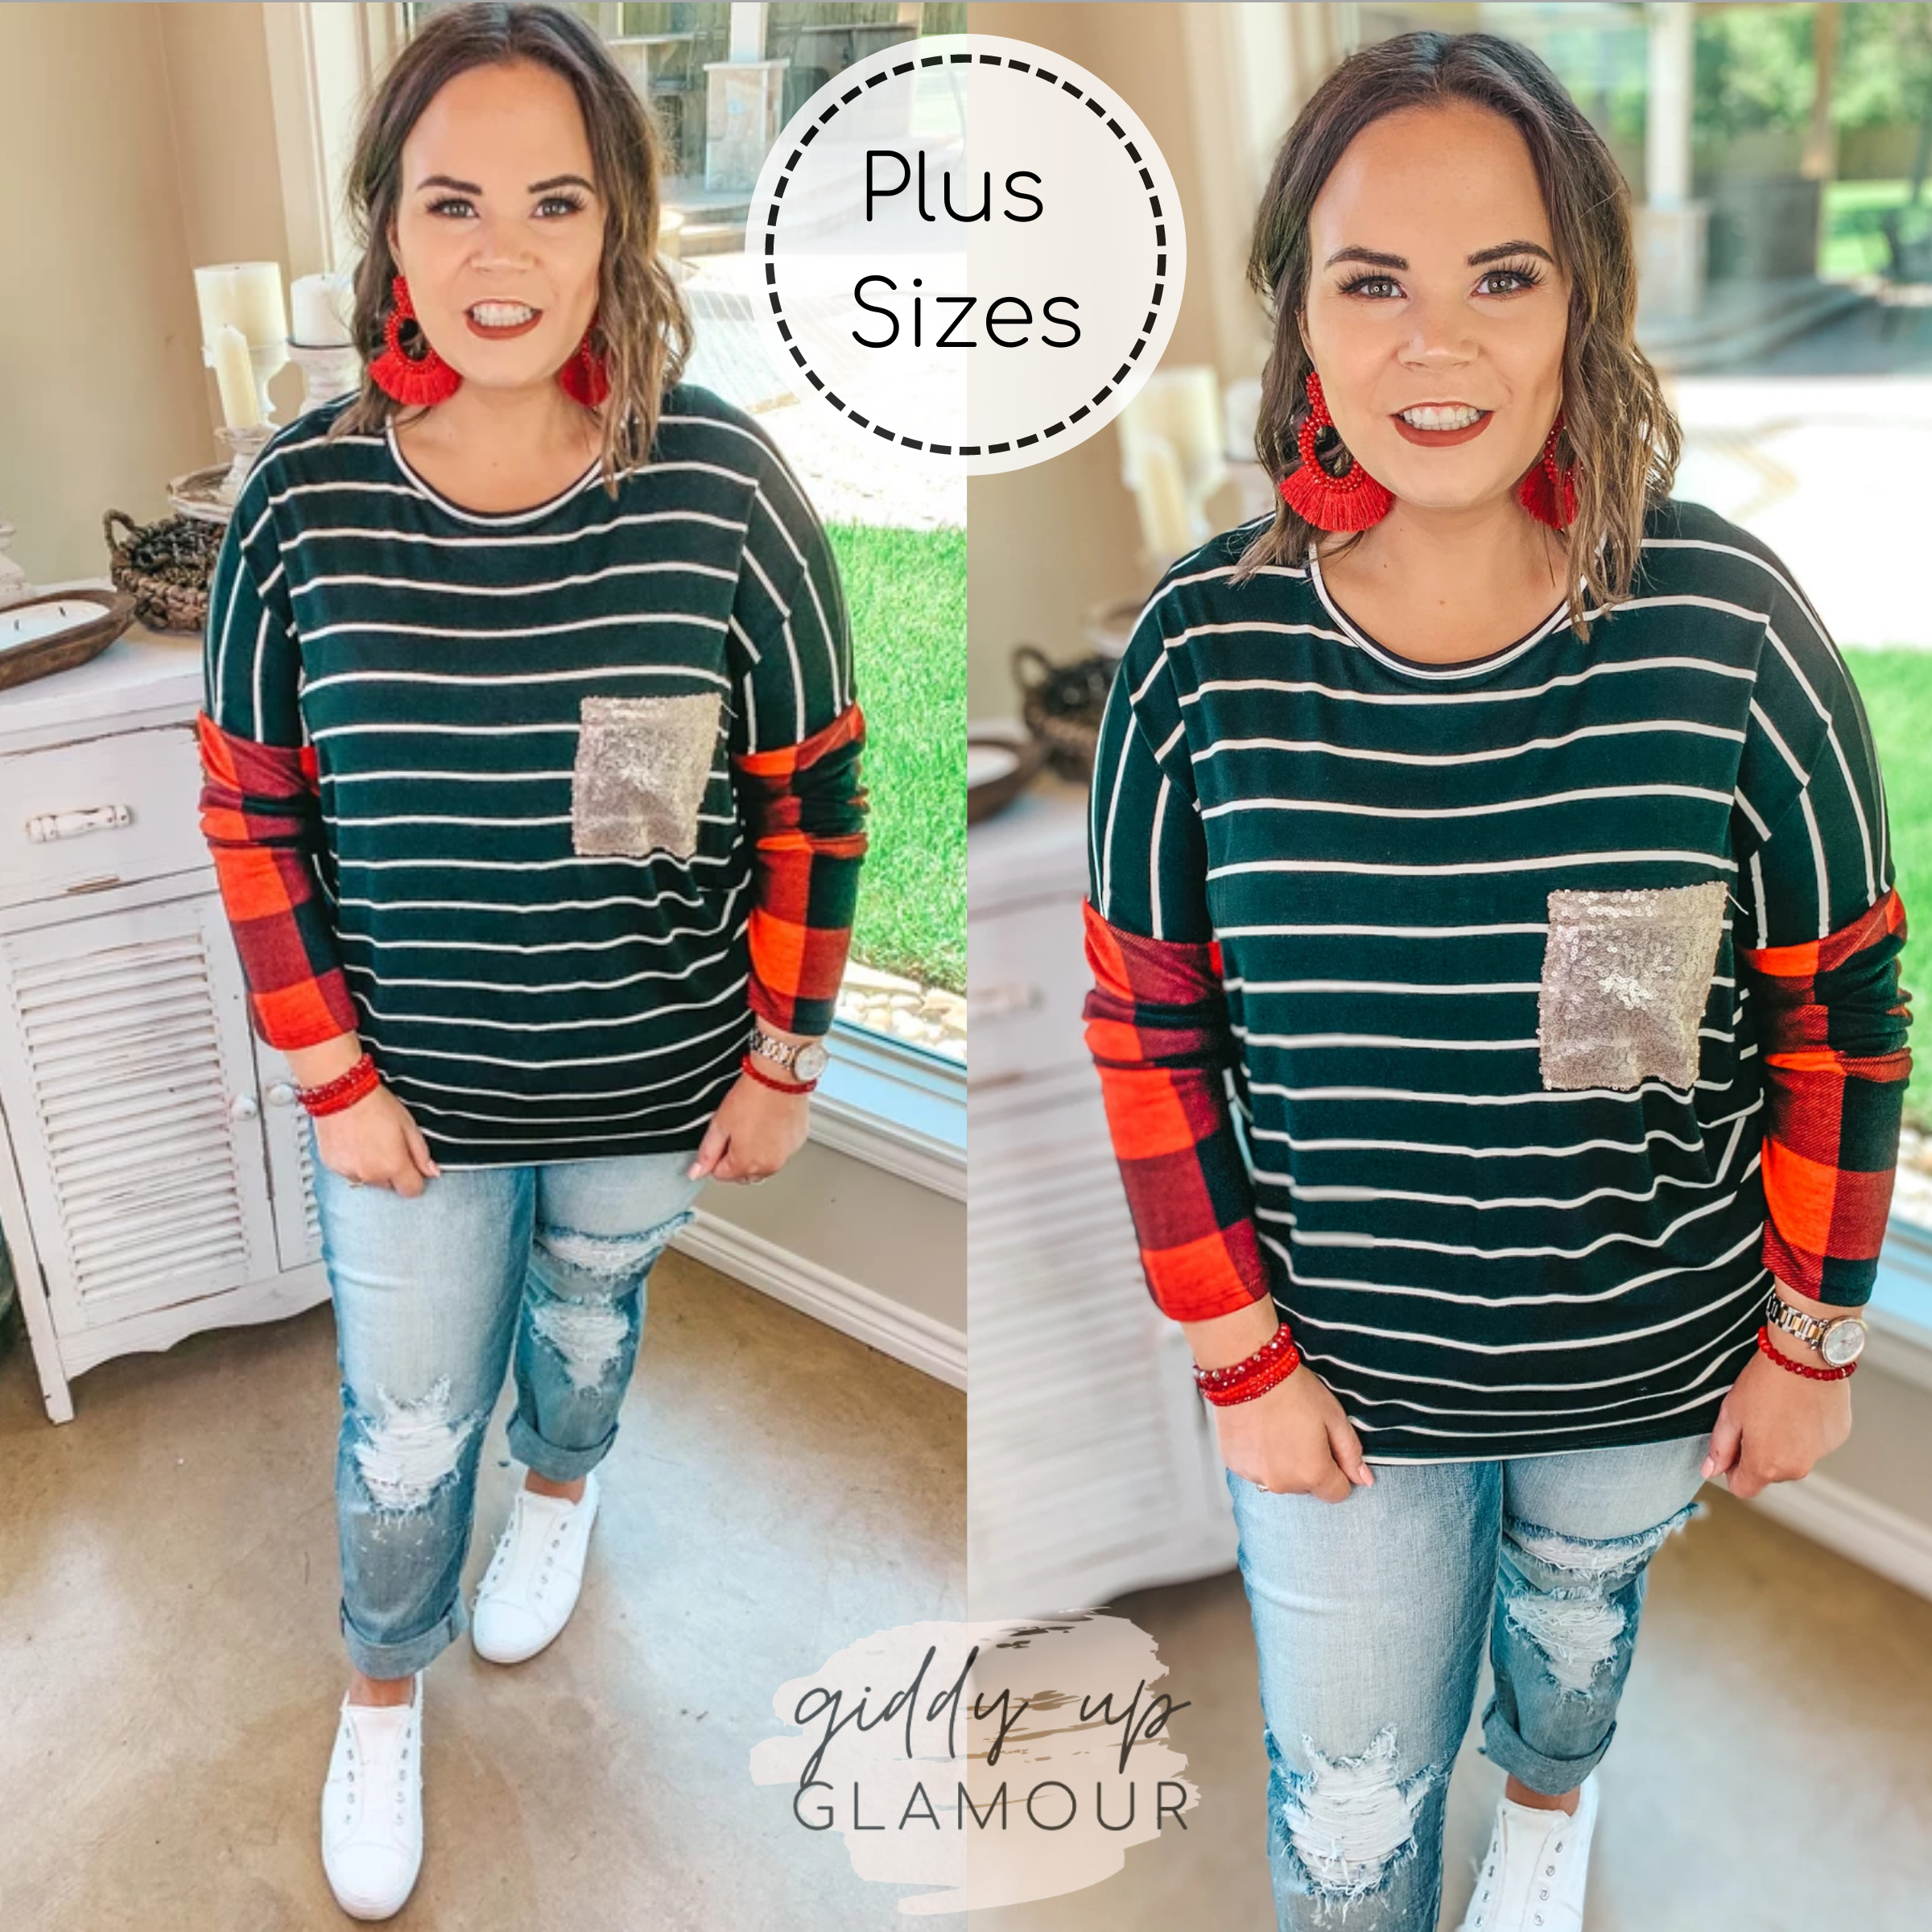 Plus Sizes | Just Getting Started Buffalo Plaid and Striped Pocket Top in Red and Black - Giddy Up Glamour Boutique